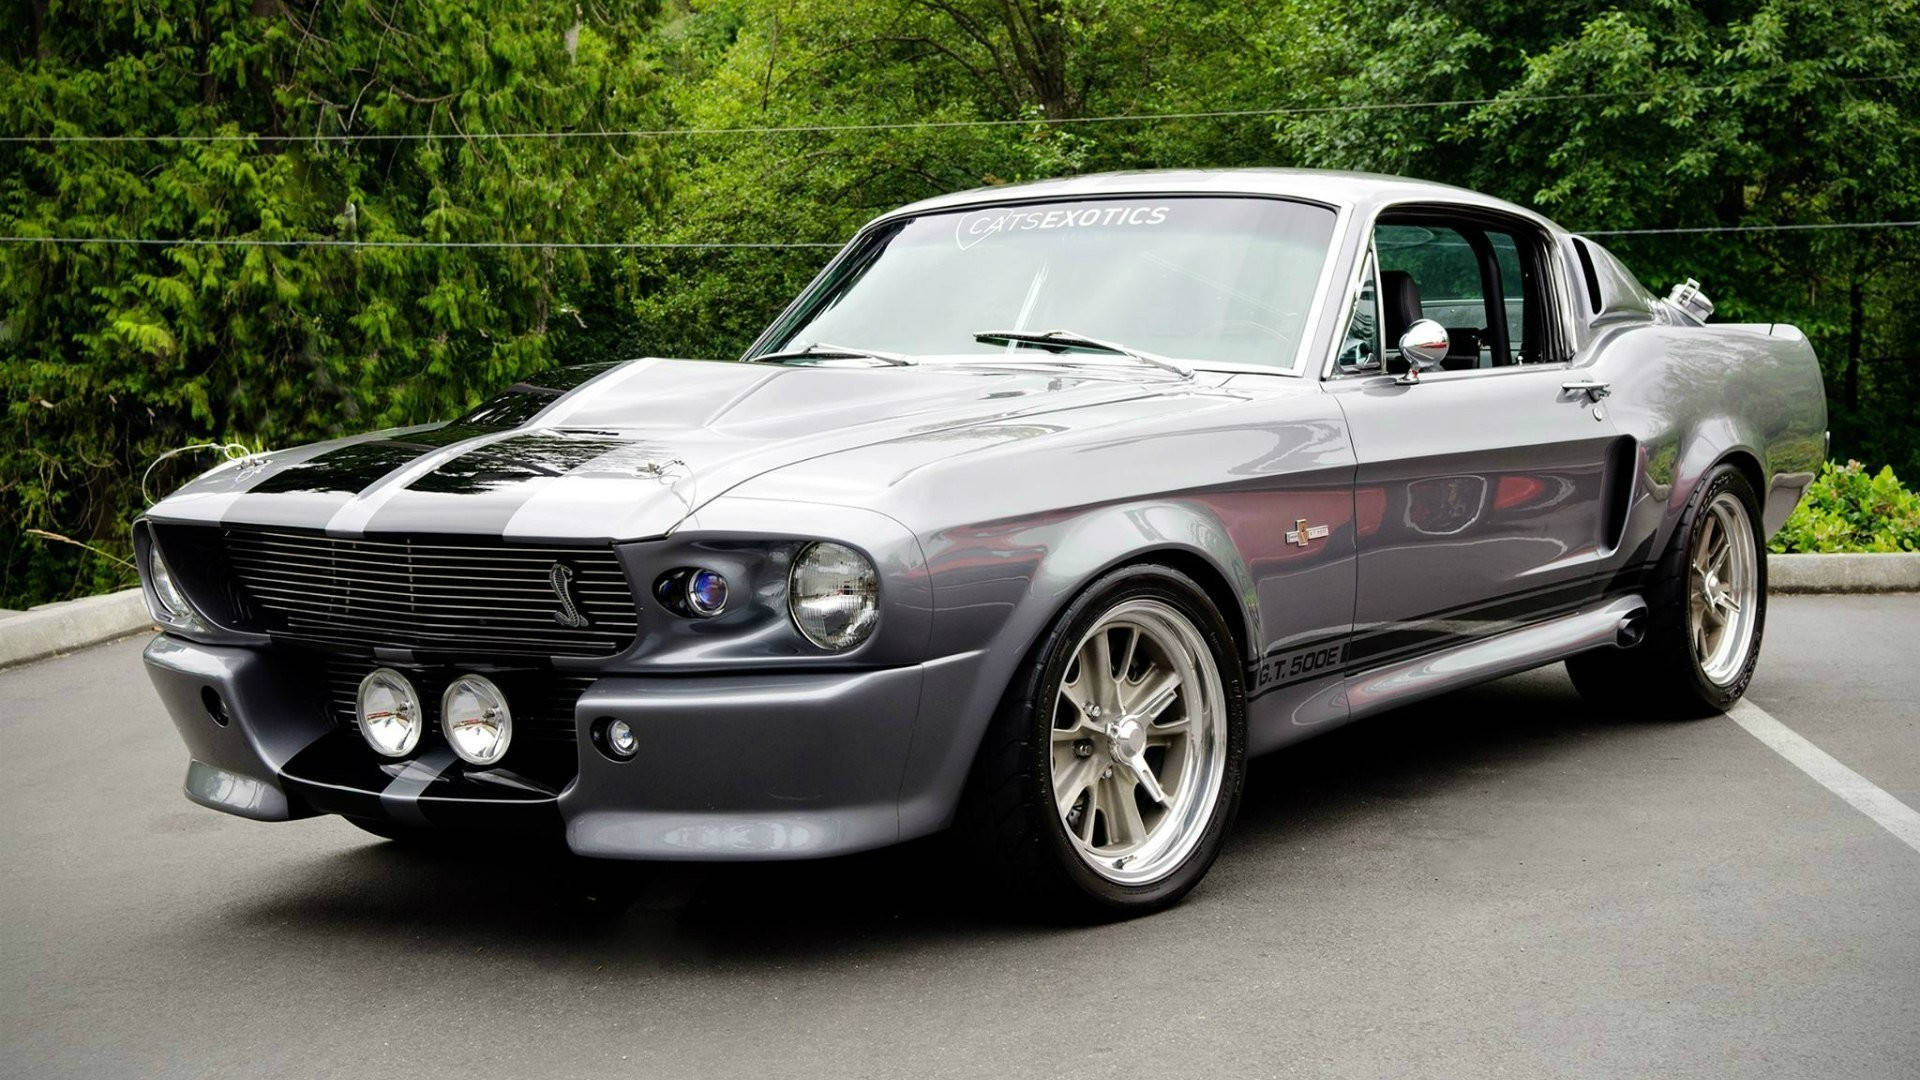 Gray Ford Mustang Hd Eleanor